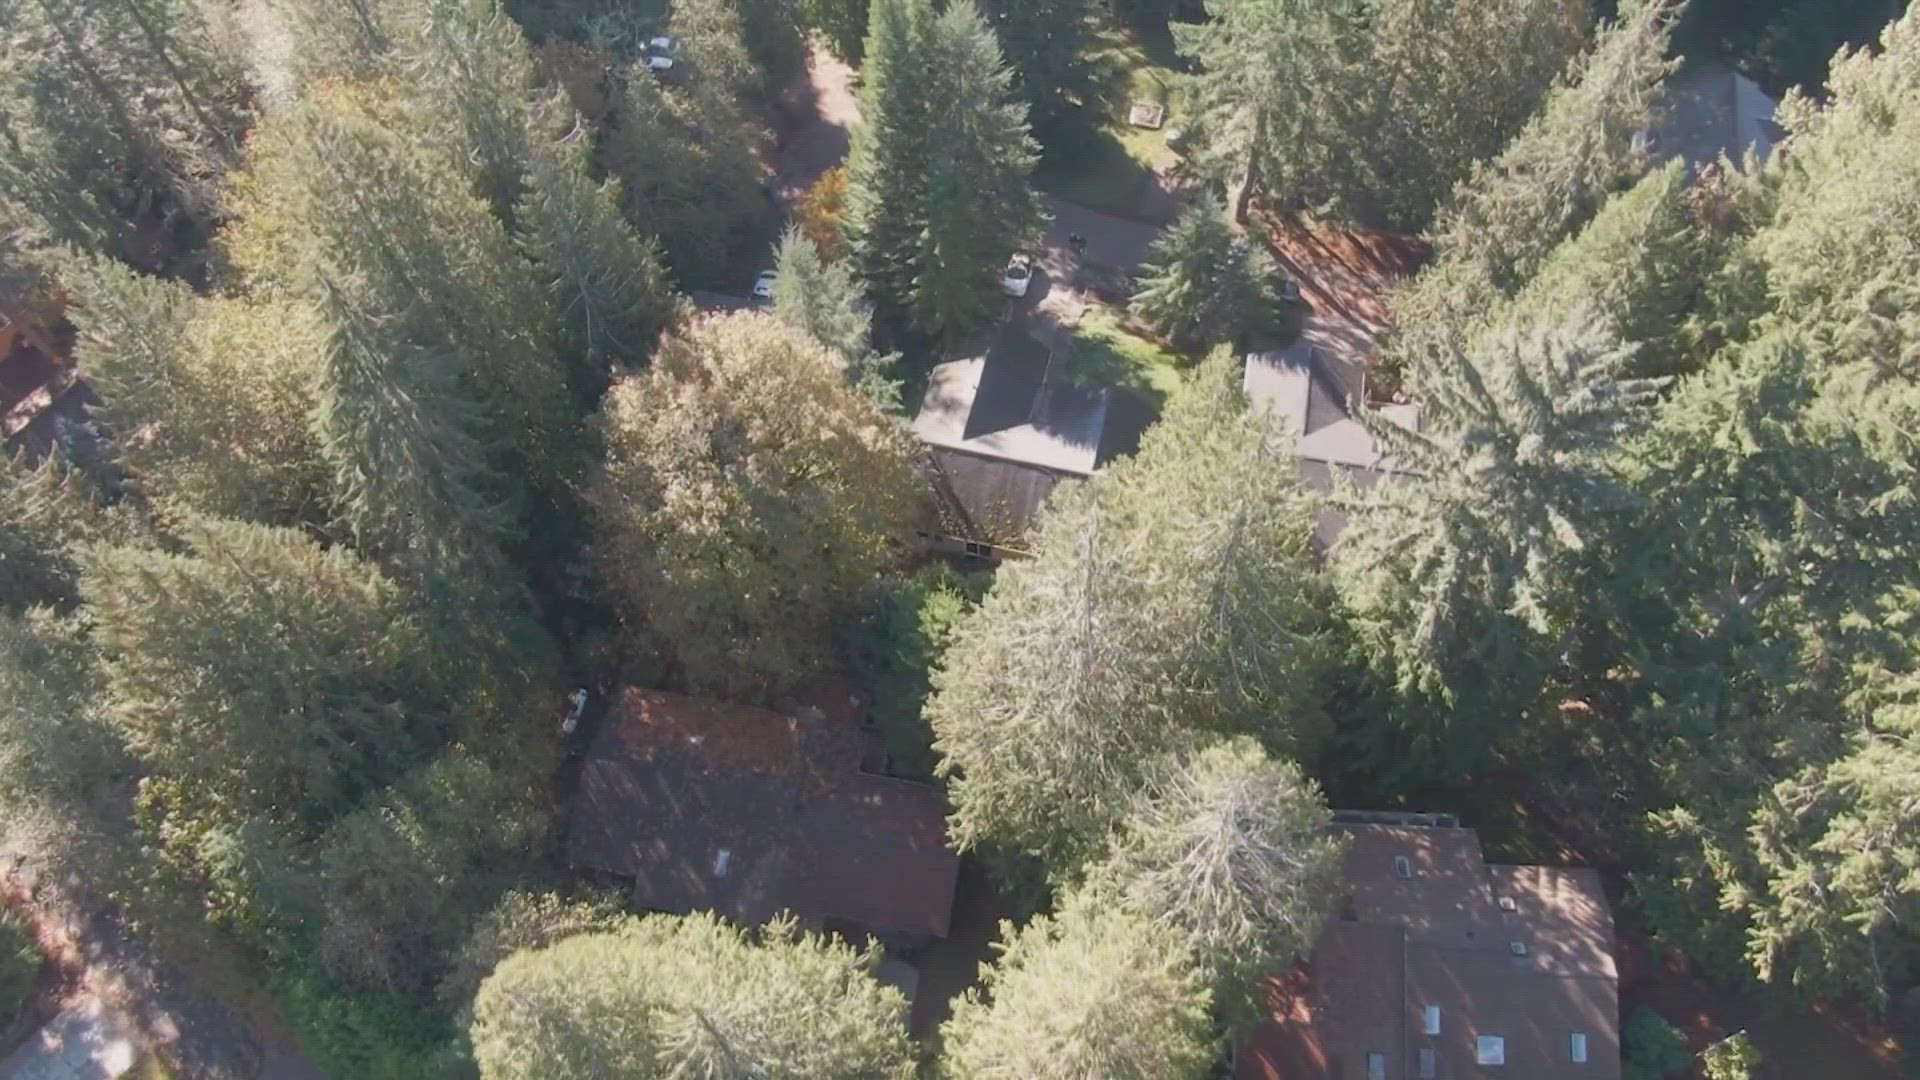 The regulations would eliminate trees and require at least 30 feet of "defensible space" around new homes.